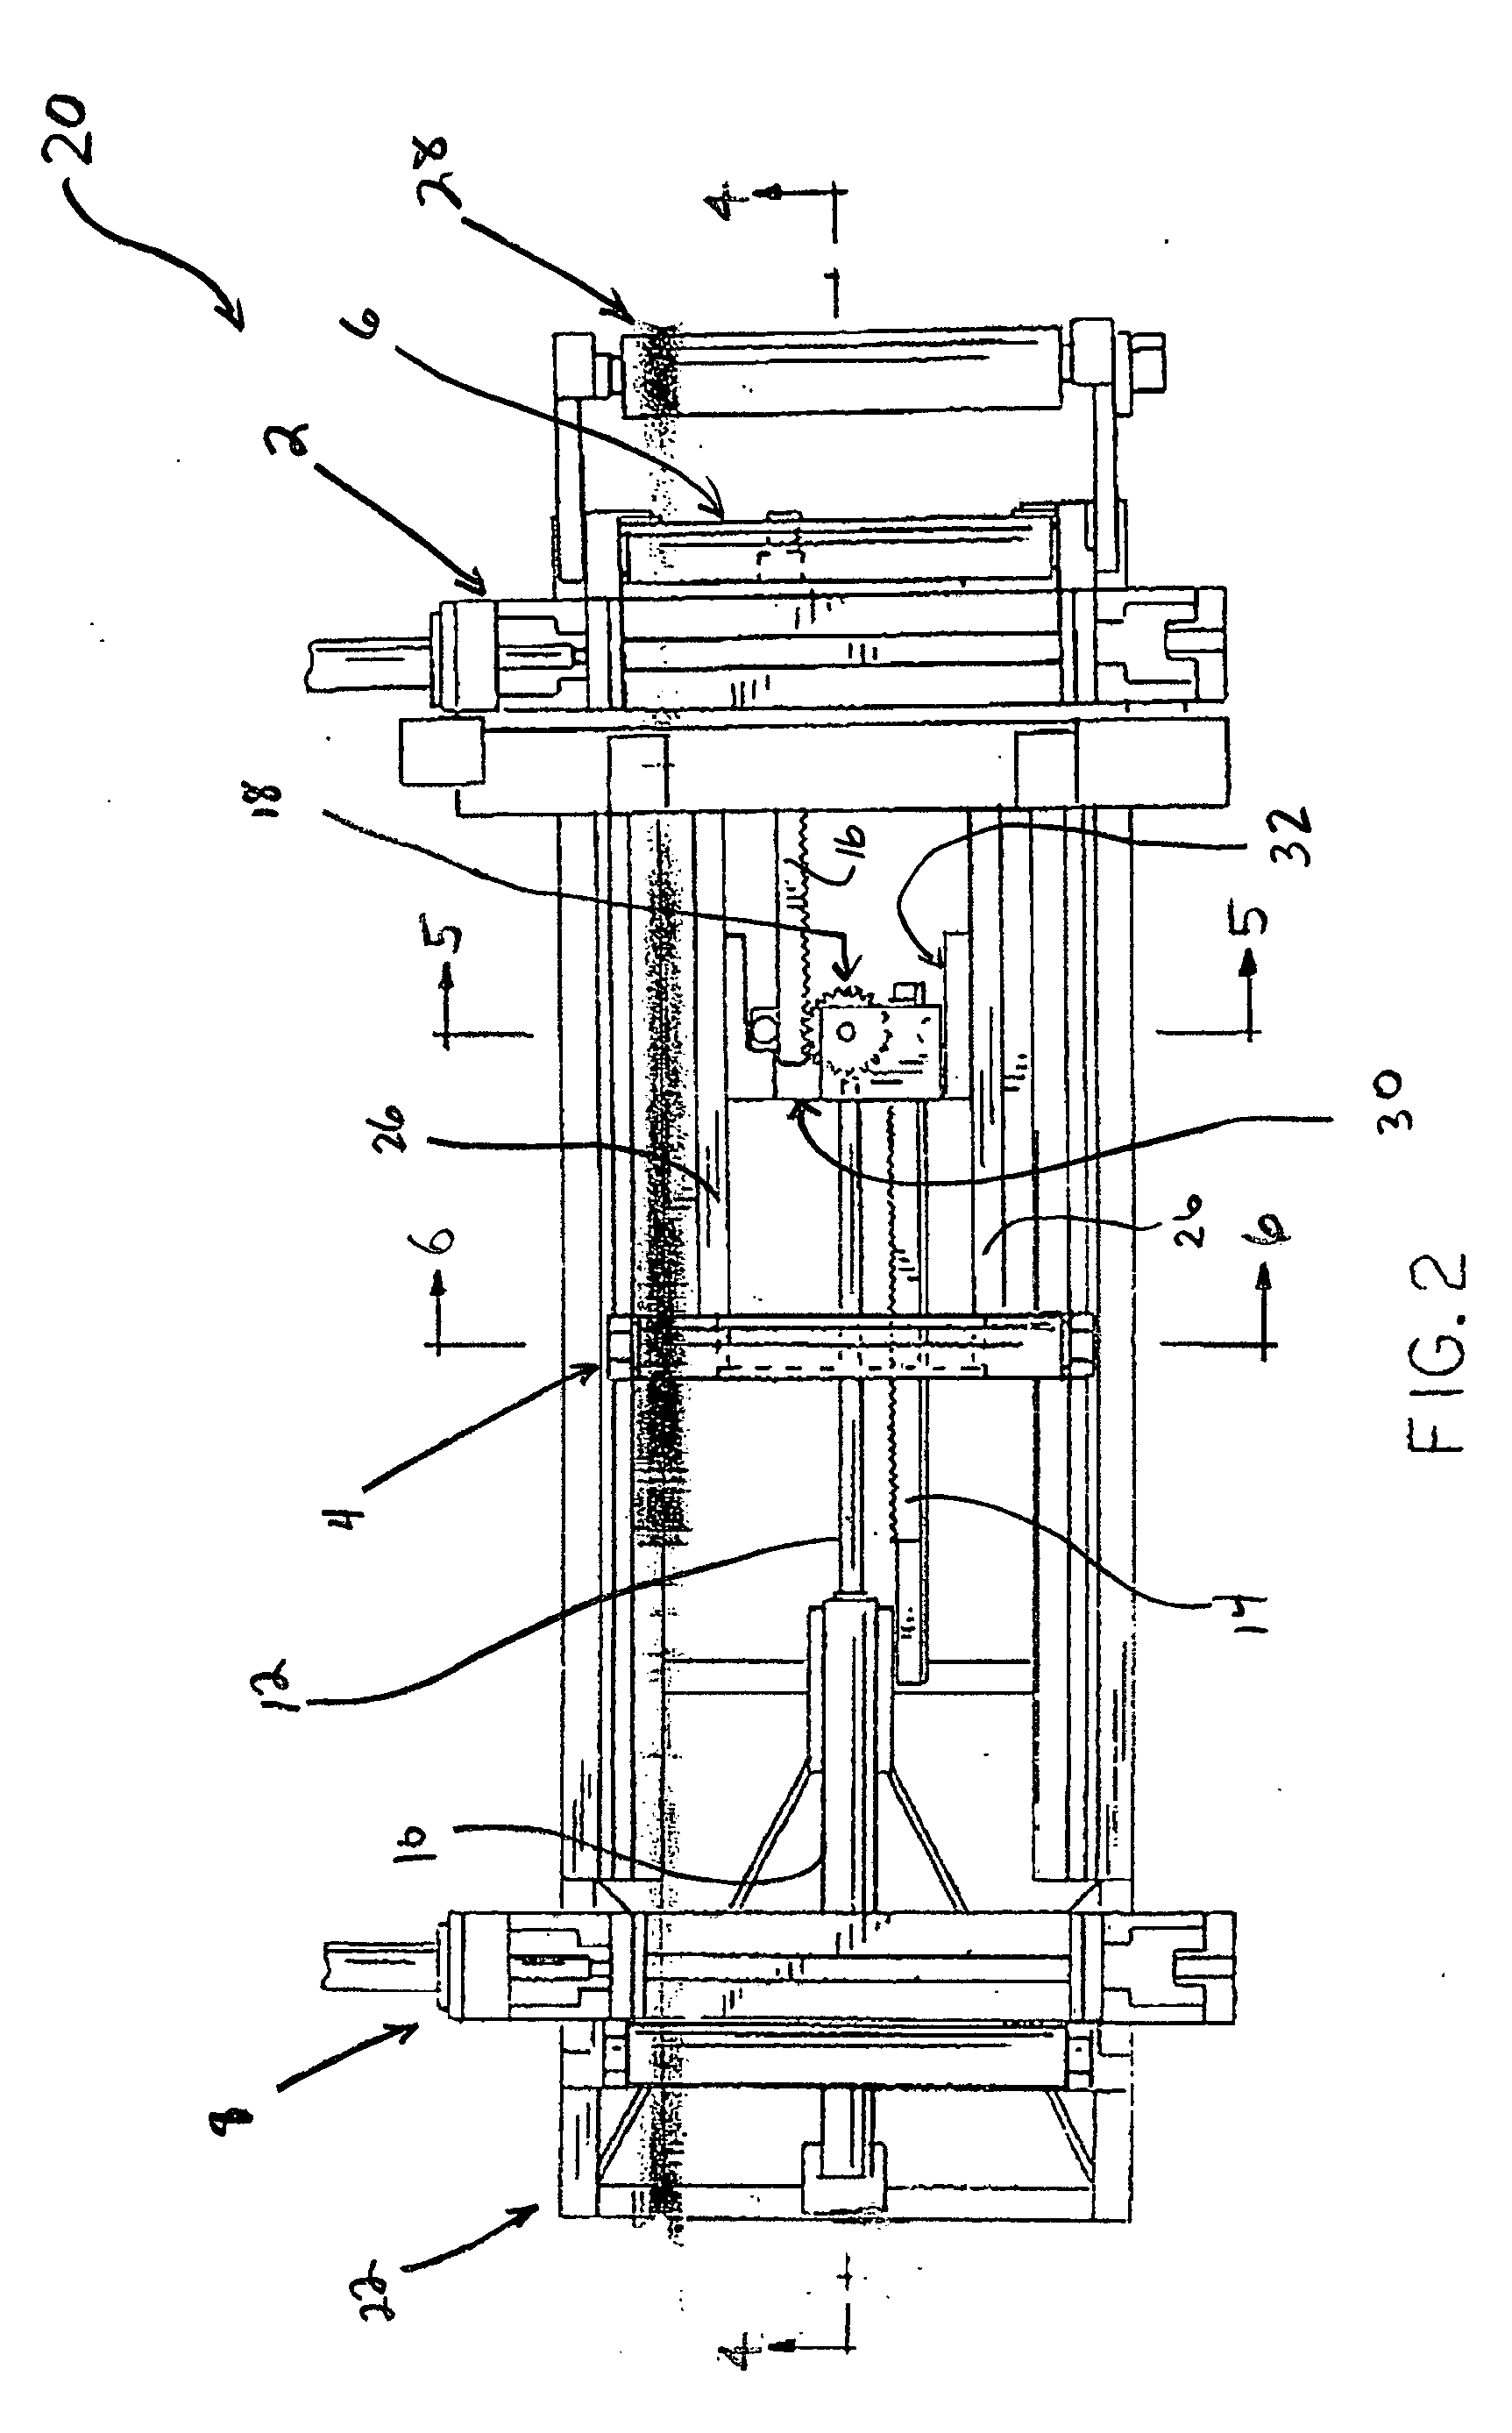 Vise carriage and support mechanism